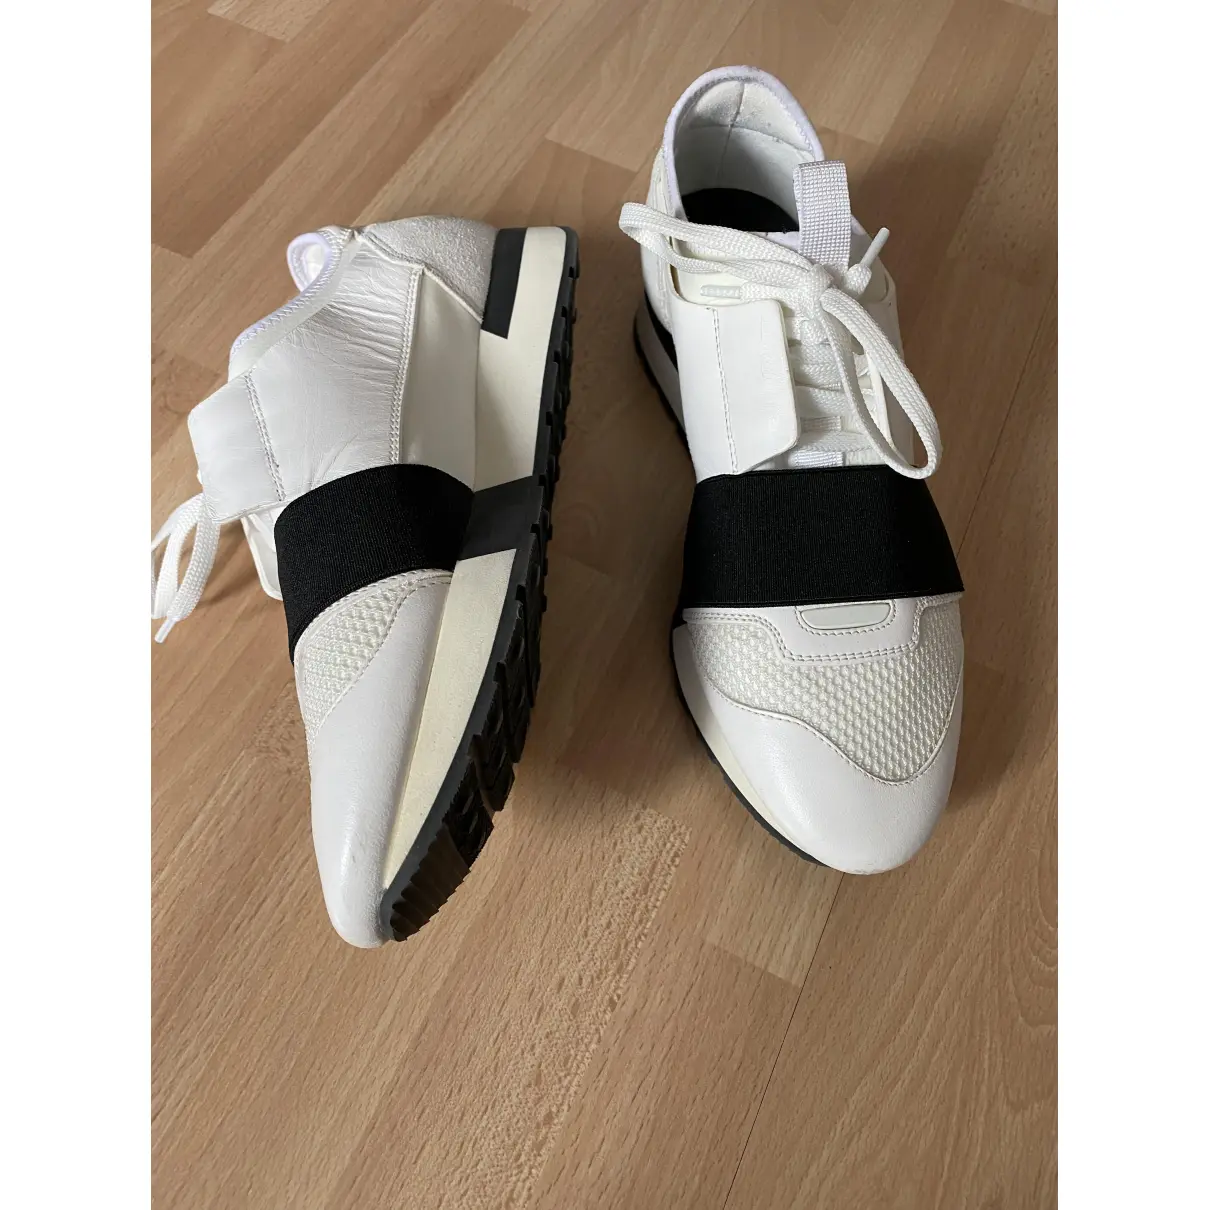 Buy Balenciaga Race leather trainers online